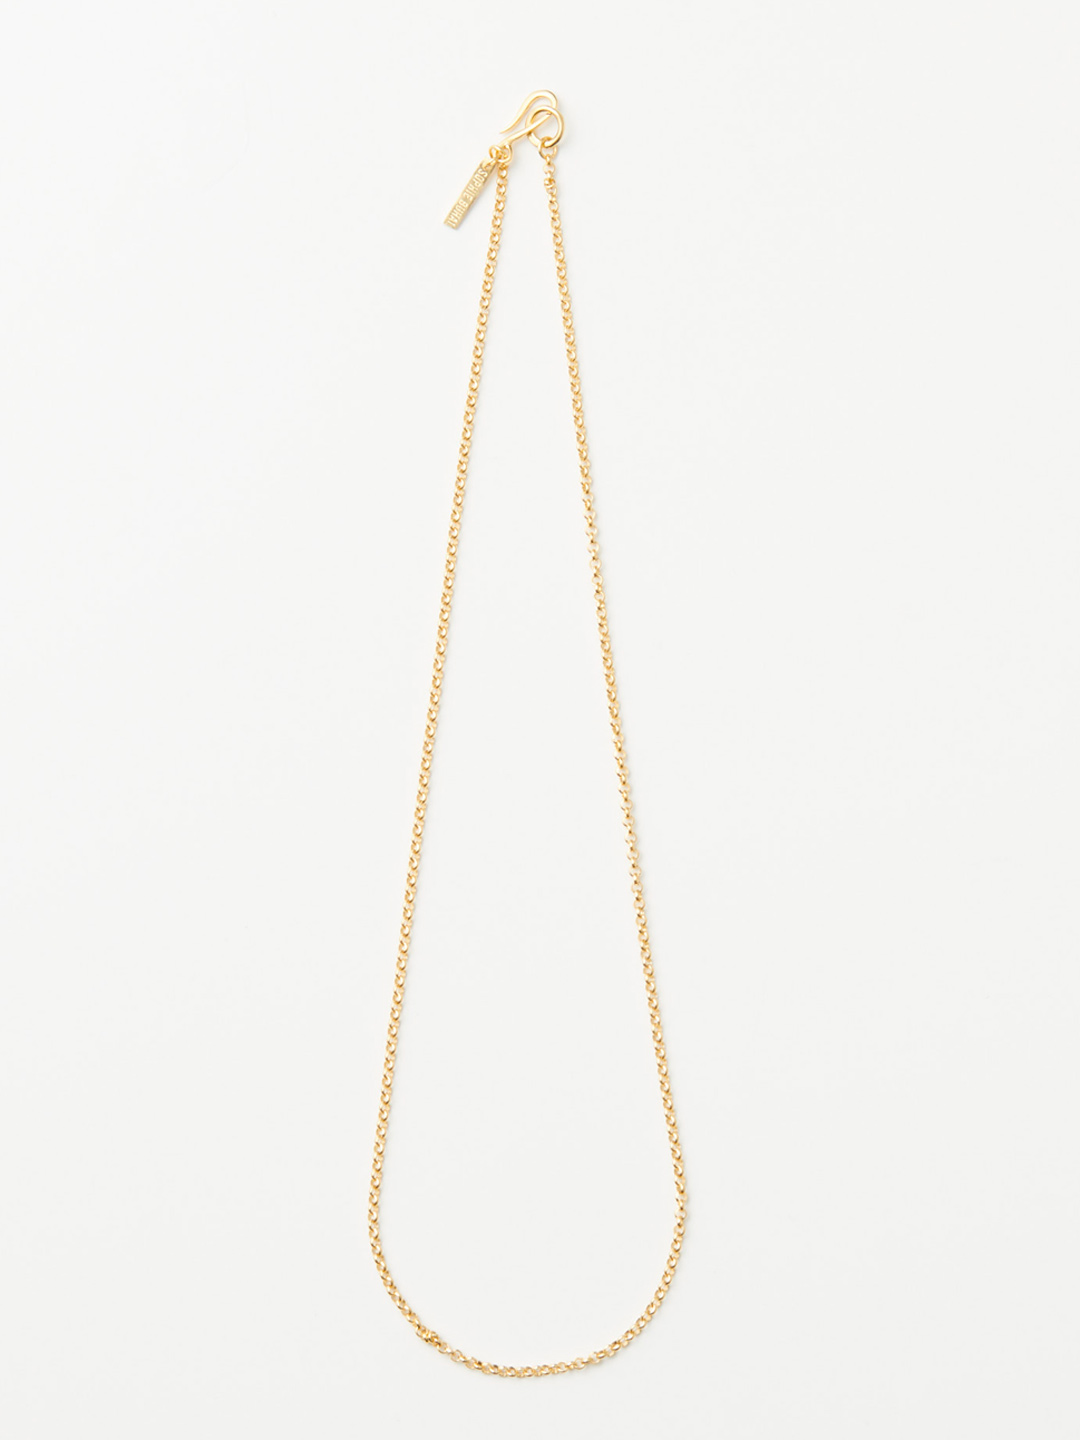 Nage Chain Necklace 50cm - Gold